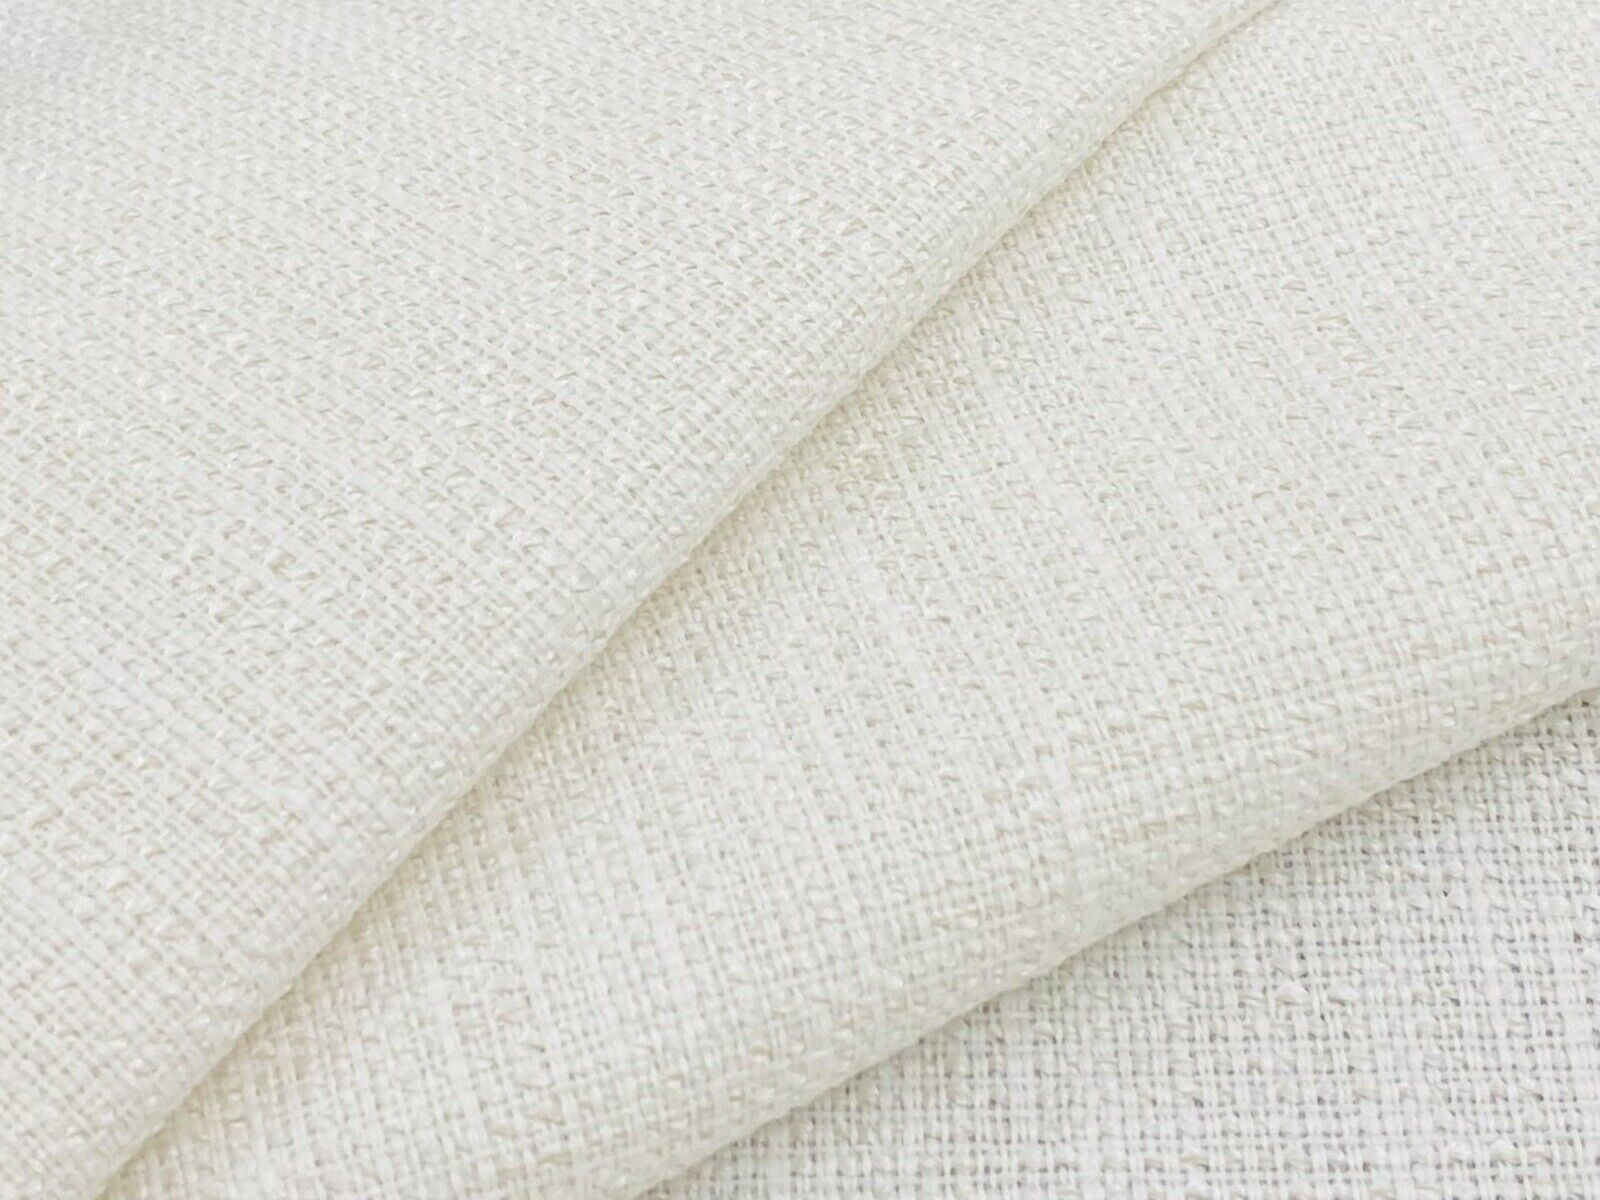 Kravet INSIDE OUT White Performance Outdoor Tweed Uphol Fabric 9.25 yds 35518-1